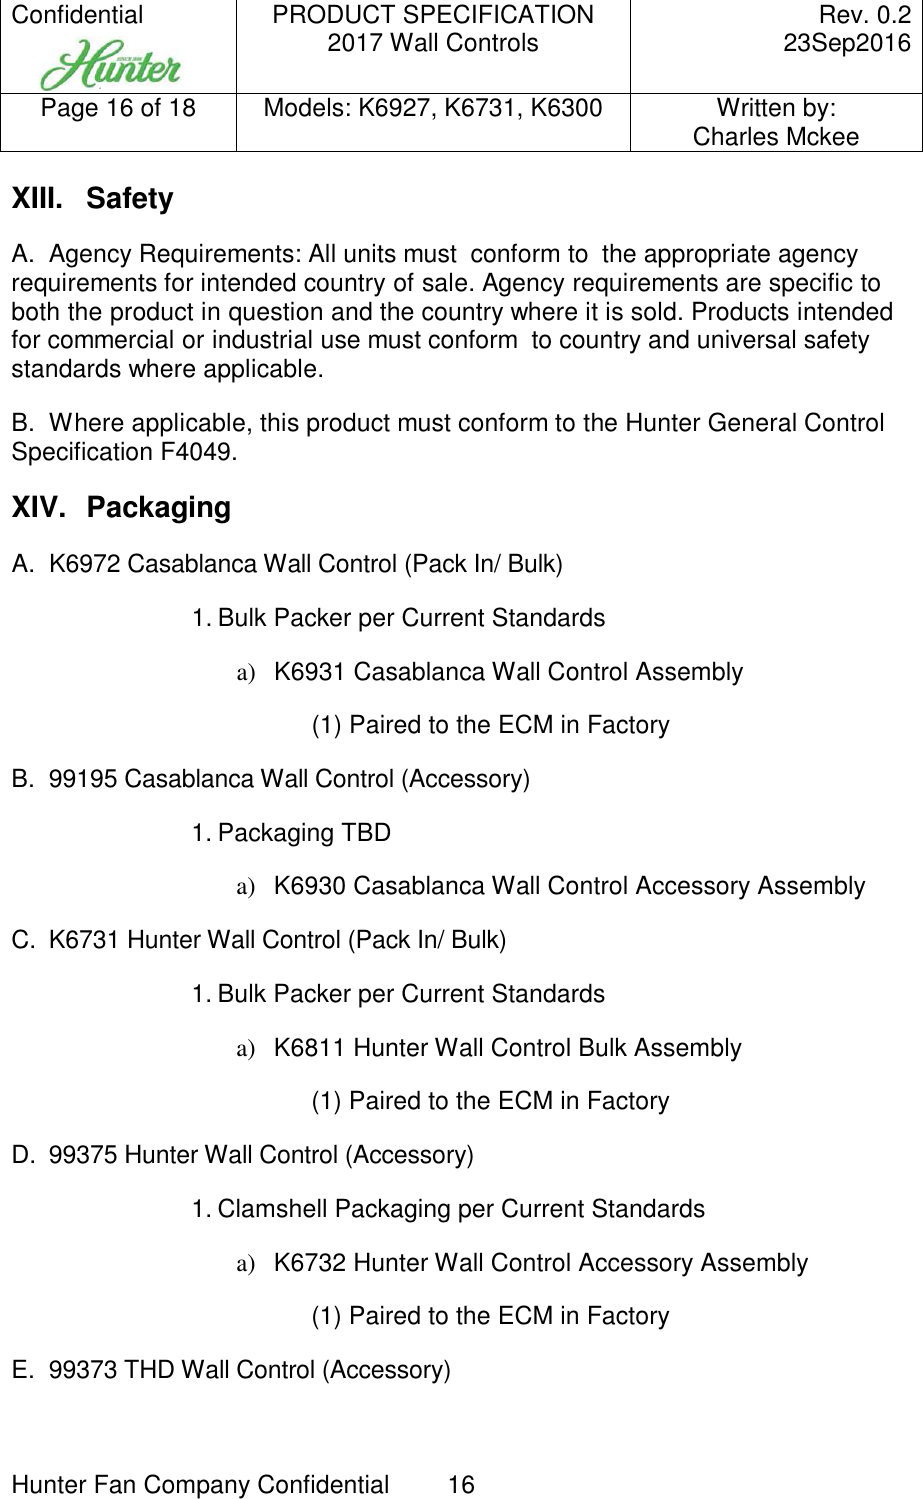 Confidential     PRODUCT SPECIFICATION 2017 Wall Controls  Rev. 0.2     23Sep2016 Page 16 of 18  Models: K6927, K6731, K6300  Written by: Charles Mckee  Hunter Fan Company Confidential  16   XIII.  Safety A.  Agency Requirements: All units must  conform to  the appropriate agency requirements for intended country of sale. Agency requirements are specific to both the product in question and the country where it is sold. Products intended for commercial or industrial use must conform  to country and universal safety standards where applicable. B.  Where applicable, this product must conform to the Hunter General Control Specification F4049. XIV.  Packaging A.  K6972 Casablanca Wall Control (Pack In/ Bulk)  1. Bulk Packer per Current Standards a)  K6931 Casablanca Wall Control Assembly (1) Paired to the ECM in Factory B.  99195 Casablanca Wall Control (Accessory)  1. Packaging TBD a)  K6930 Casablanca Wall Control Accessory Assembly C.  K6731 Hunter Wall Control (Pack In/ Bulk)  1. Bulk Packer per Current Standards a)  K6811 Hunter Wall Control Bulk Assembly (1) Paired to the ECM in Factory D.  99375 Hunter Wall Control (Accessory)  1. Clamshell Packaging per Current Standards a)  K6732 Hunter Wall Control Accessory Assembly (1) Paired to the ECM in Factory E.  99373 THD Wall Control (Accessory)  